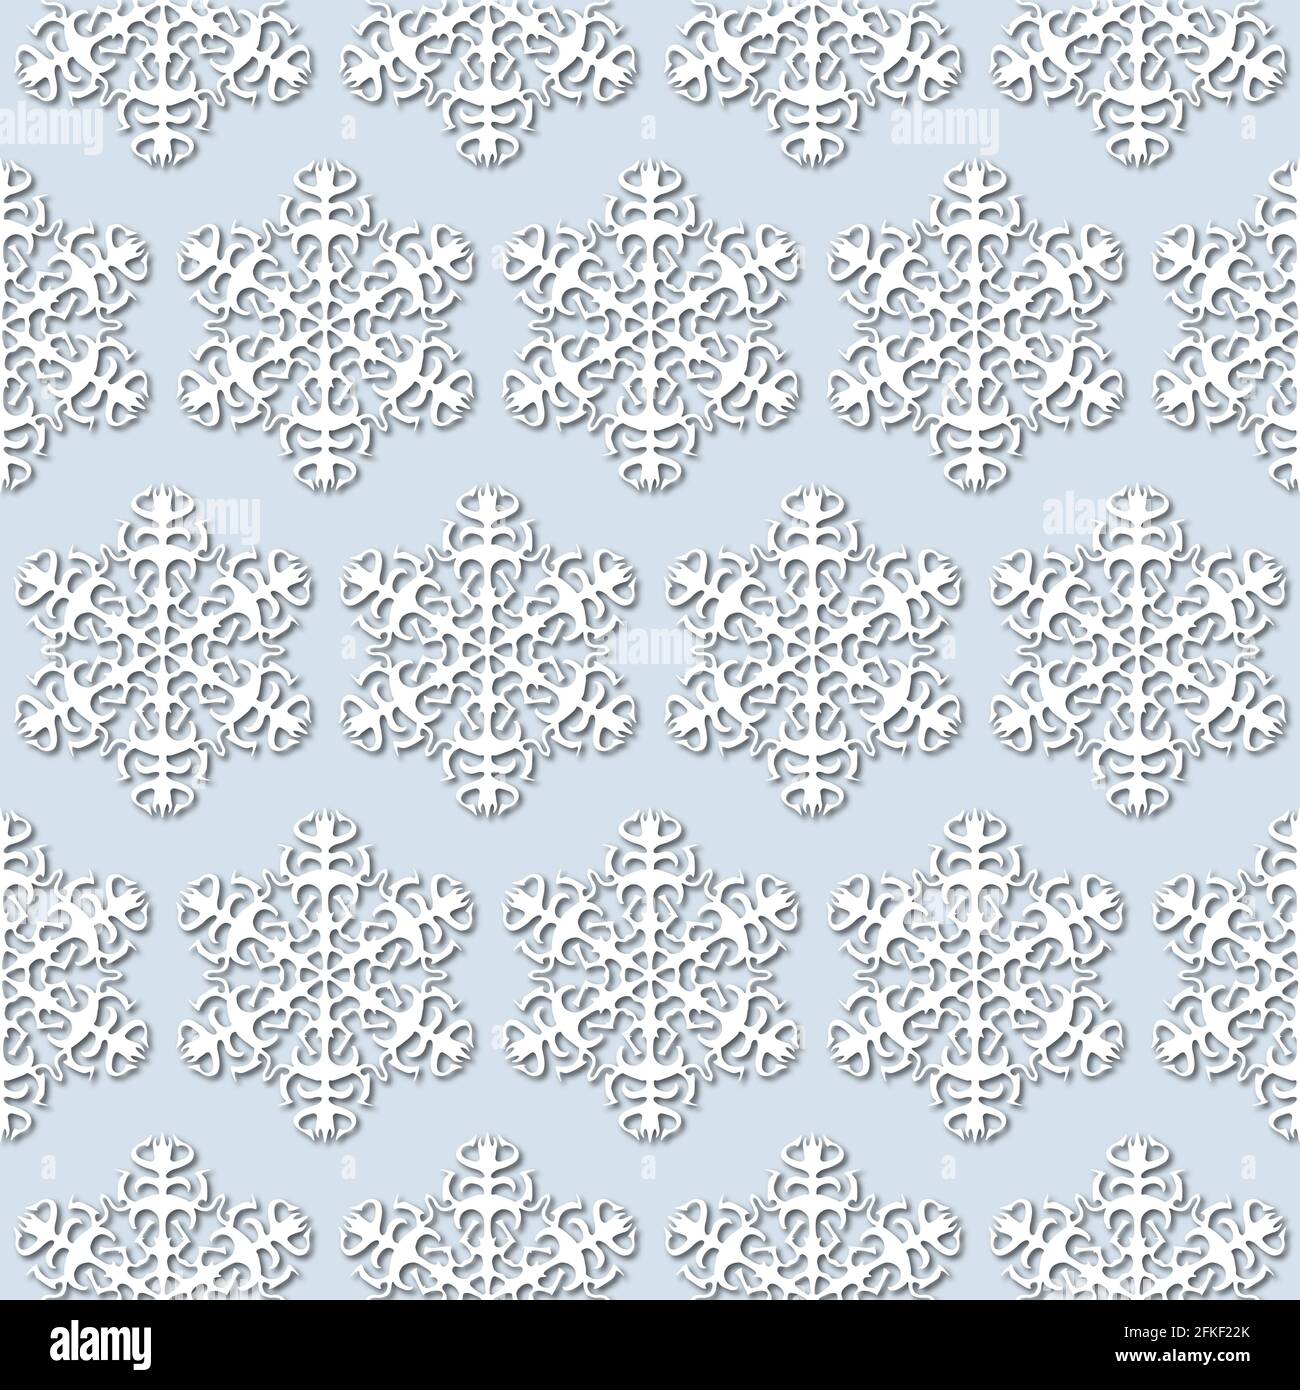 White snowflakes on pale blue background, seamless pattern. Paper cut style with drop shadows and highlights. Stock Photo